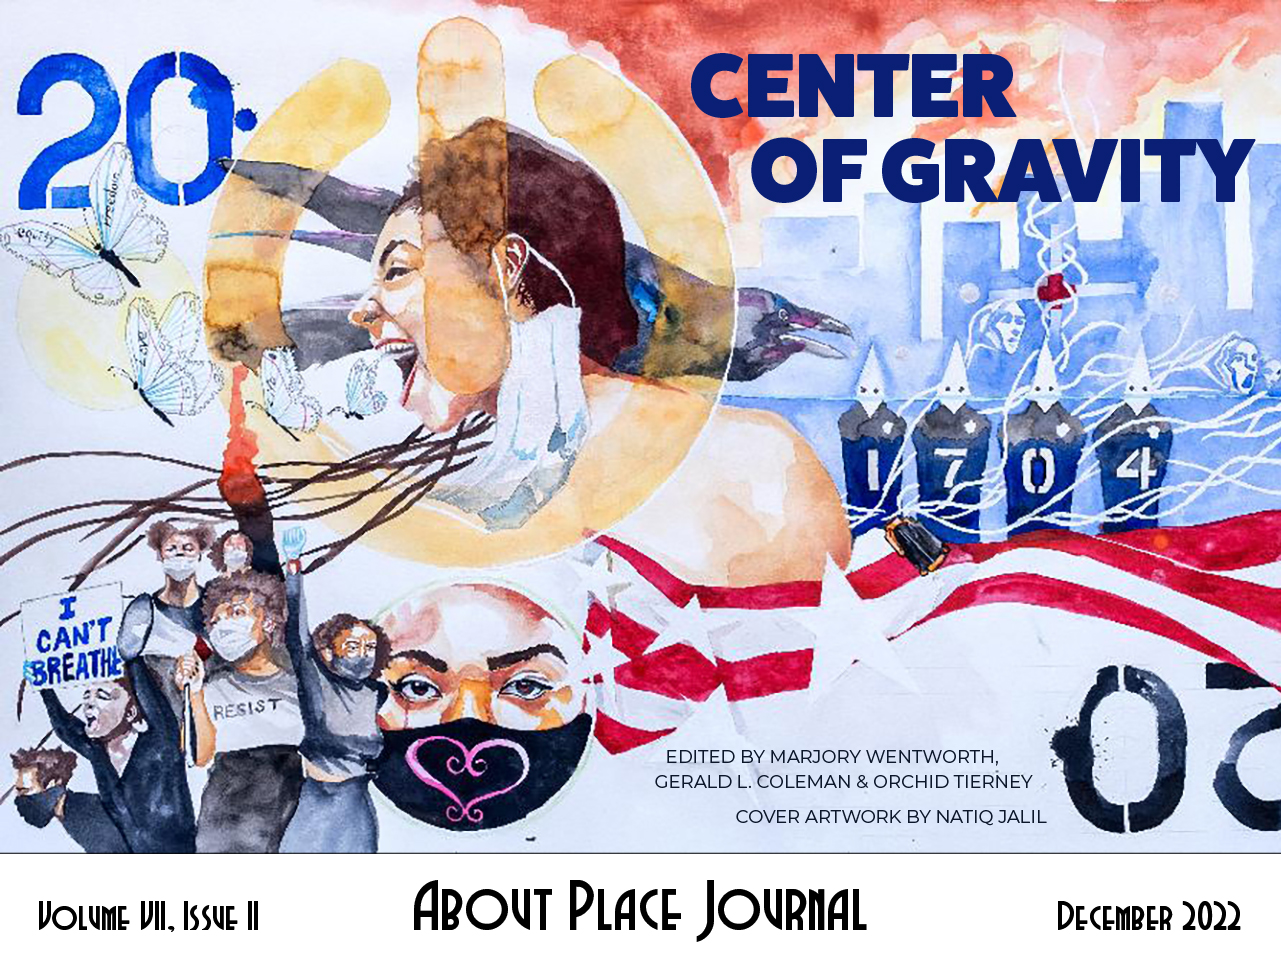 About Place Journal, Center of Gravity cover featuring artwork by Natiq Jalil